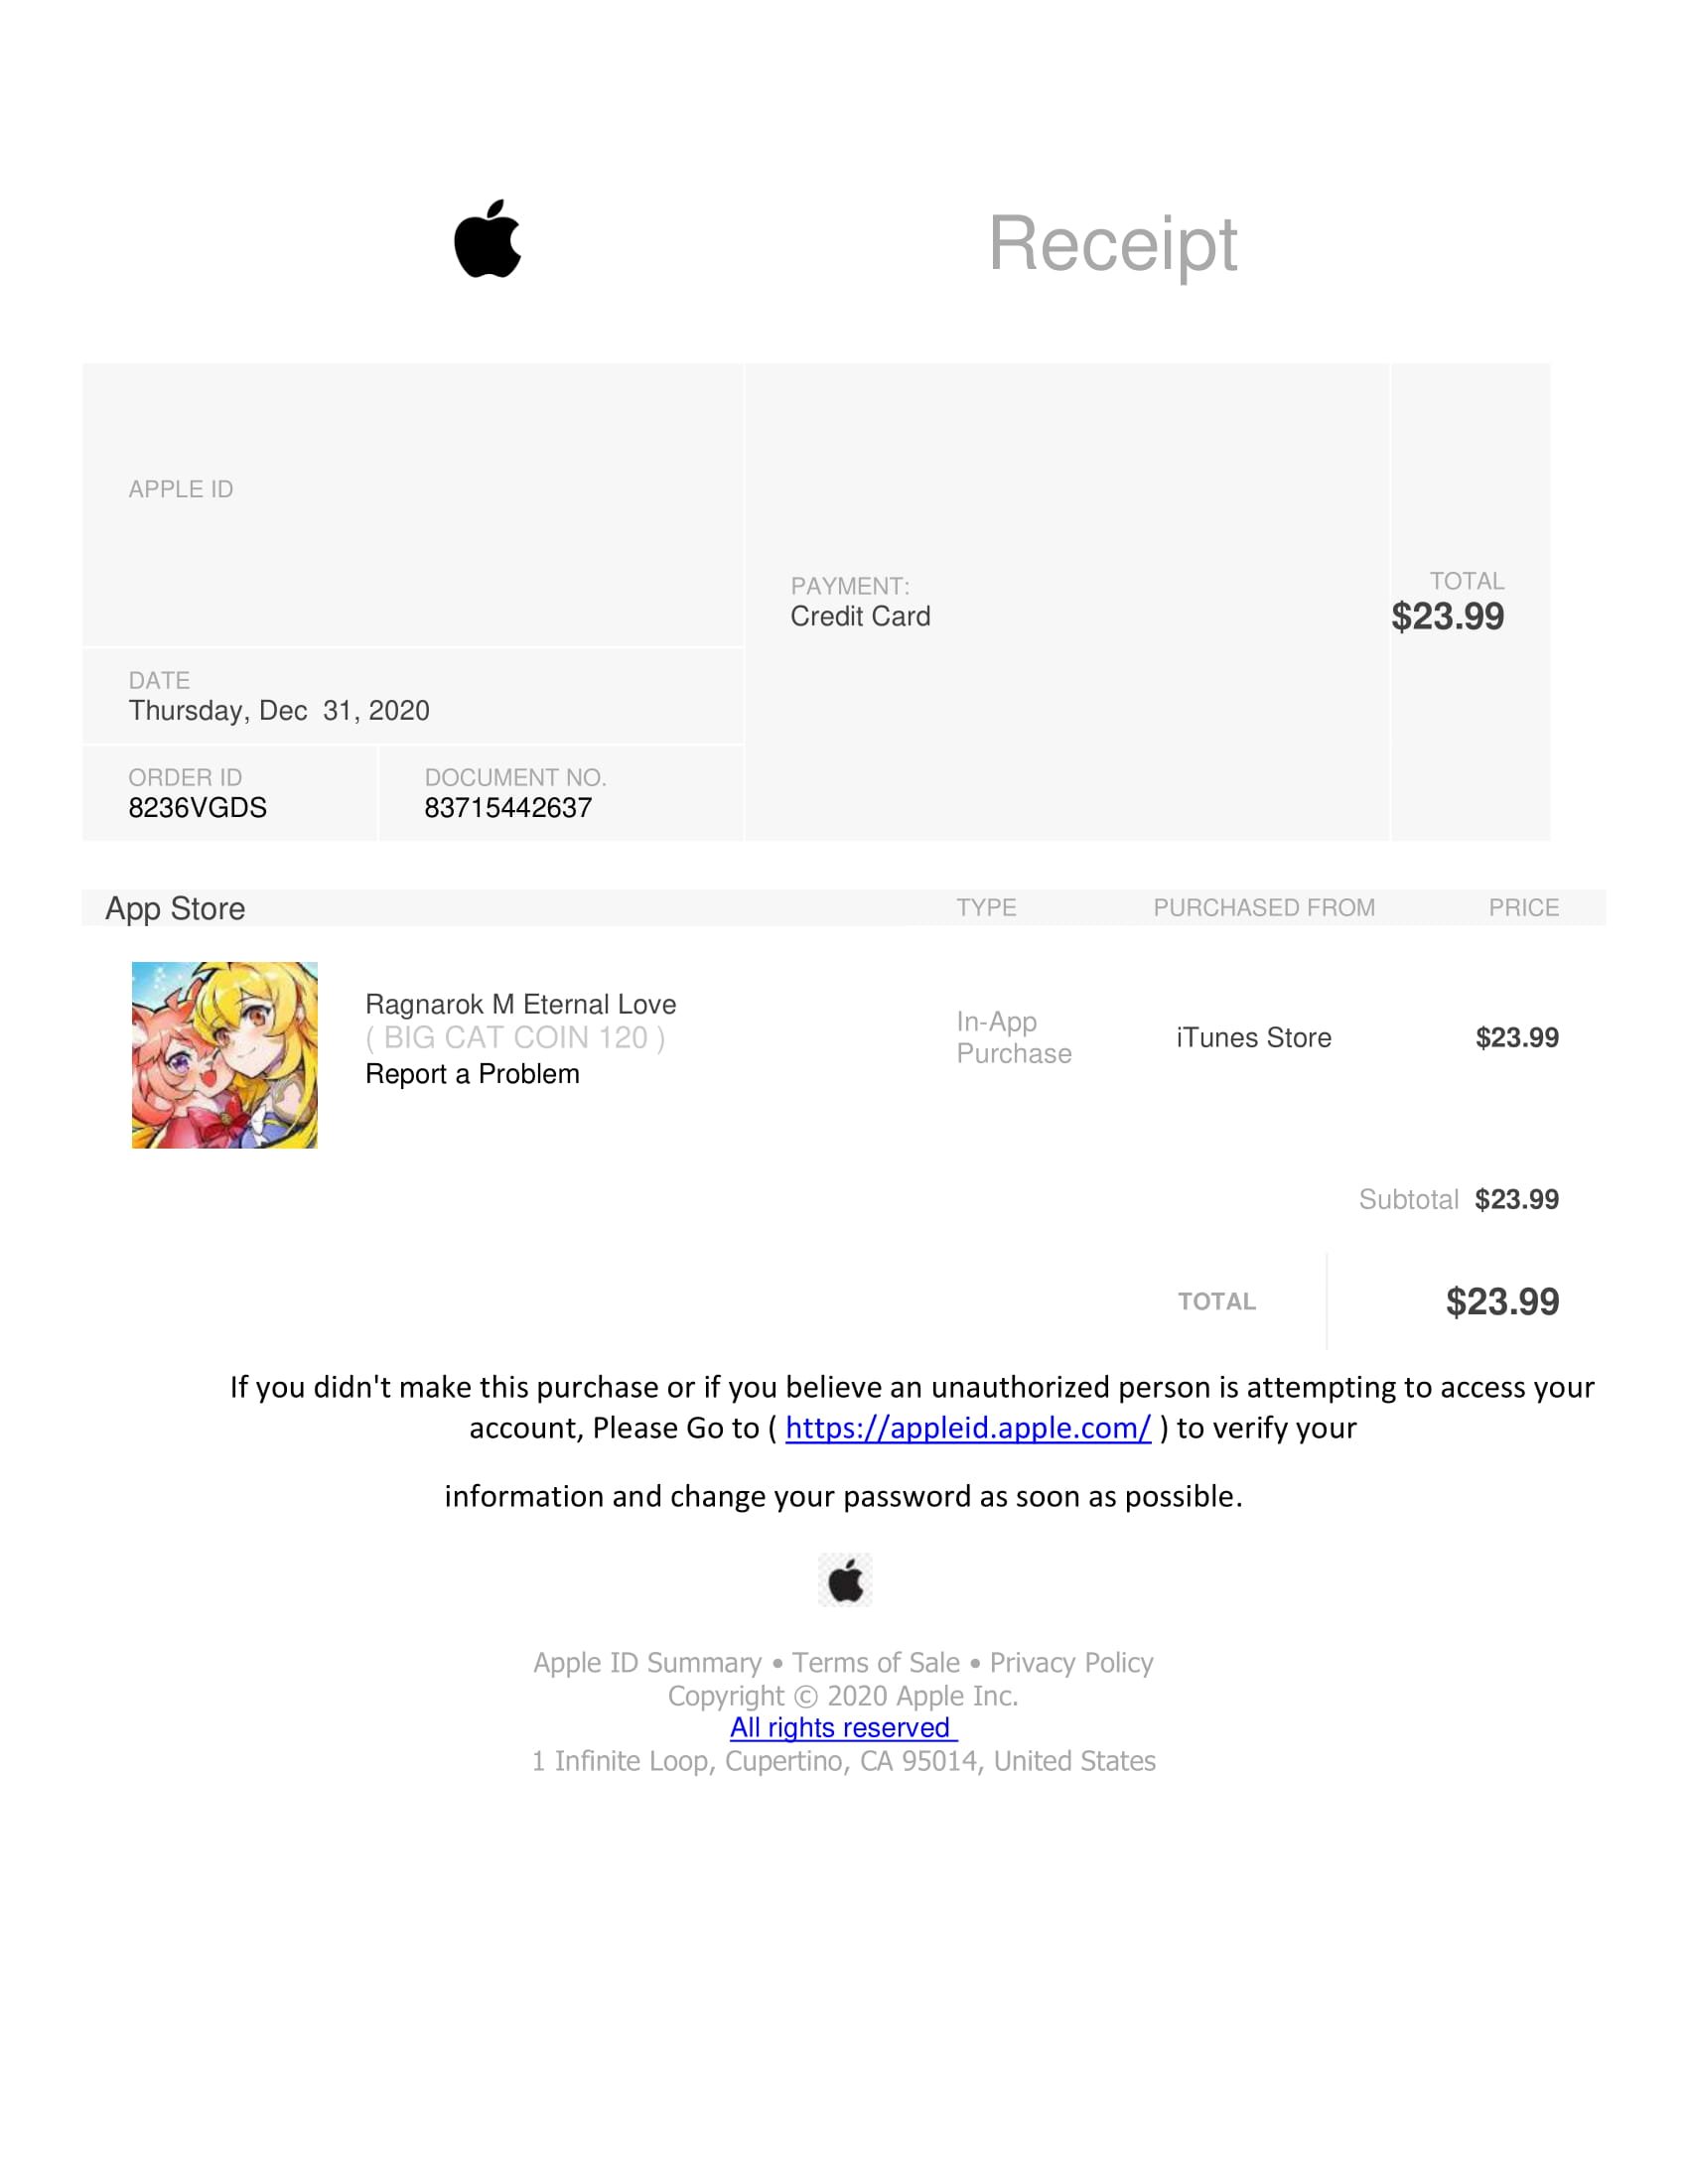 Apple Support Scam Email Invoices- Summoners War, Chest of Crystals Report a Problem